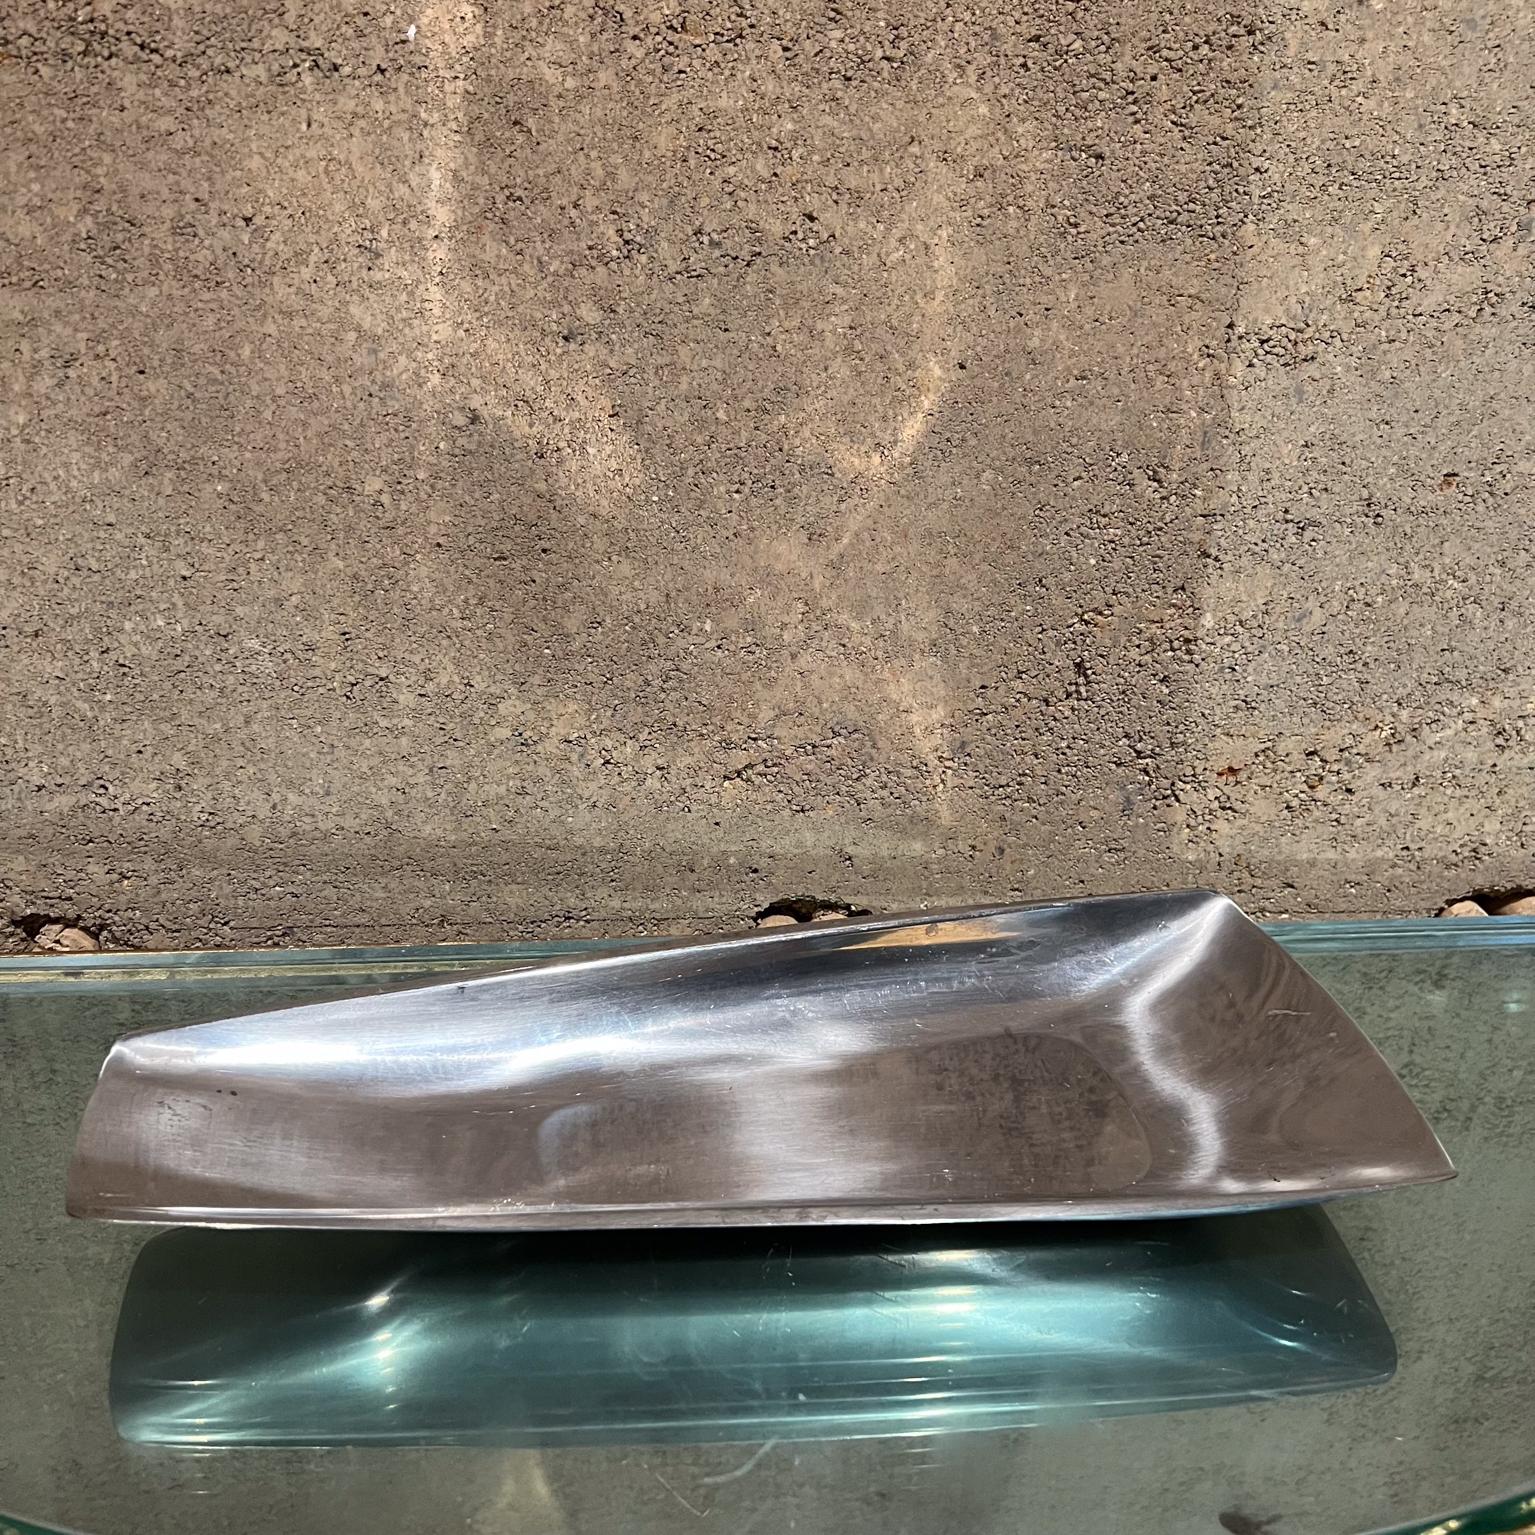 Midcentury Modernist Wedge Serving Tray from Sweden
Stainless Steel
Stamped Gense
13.75 long x 5.5 w x 1 h
Unrestored vintage condition
See all images provided.